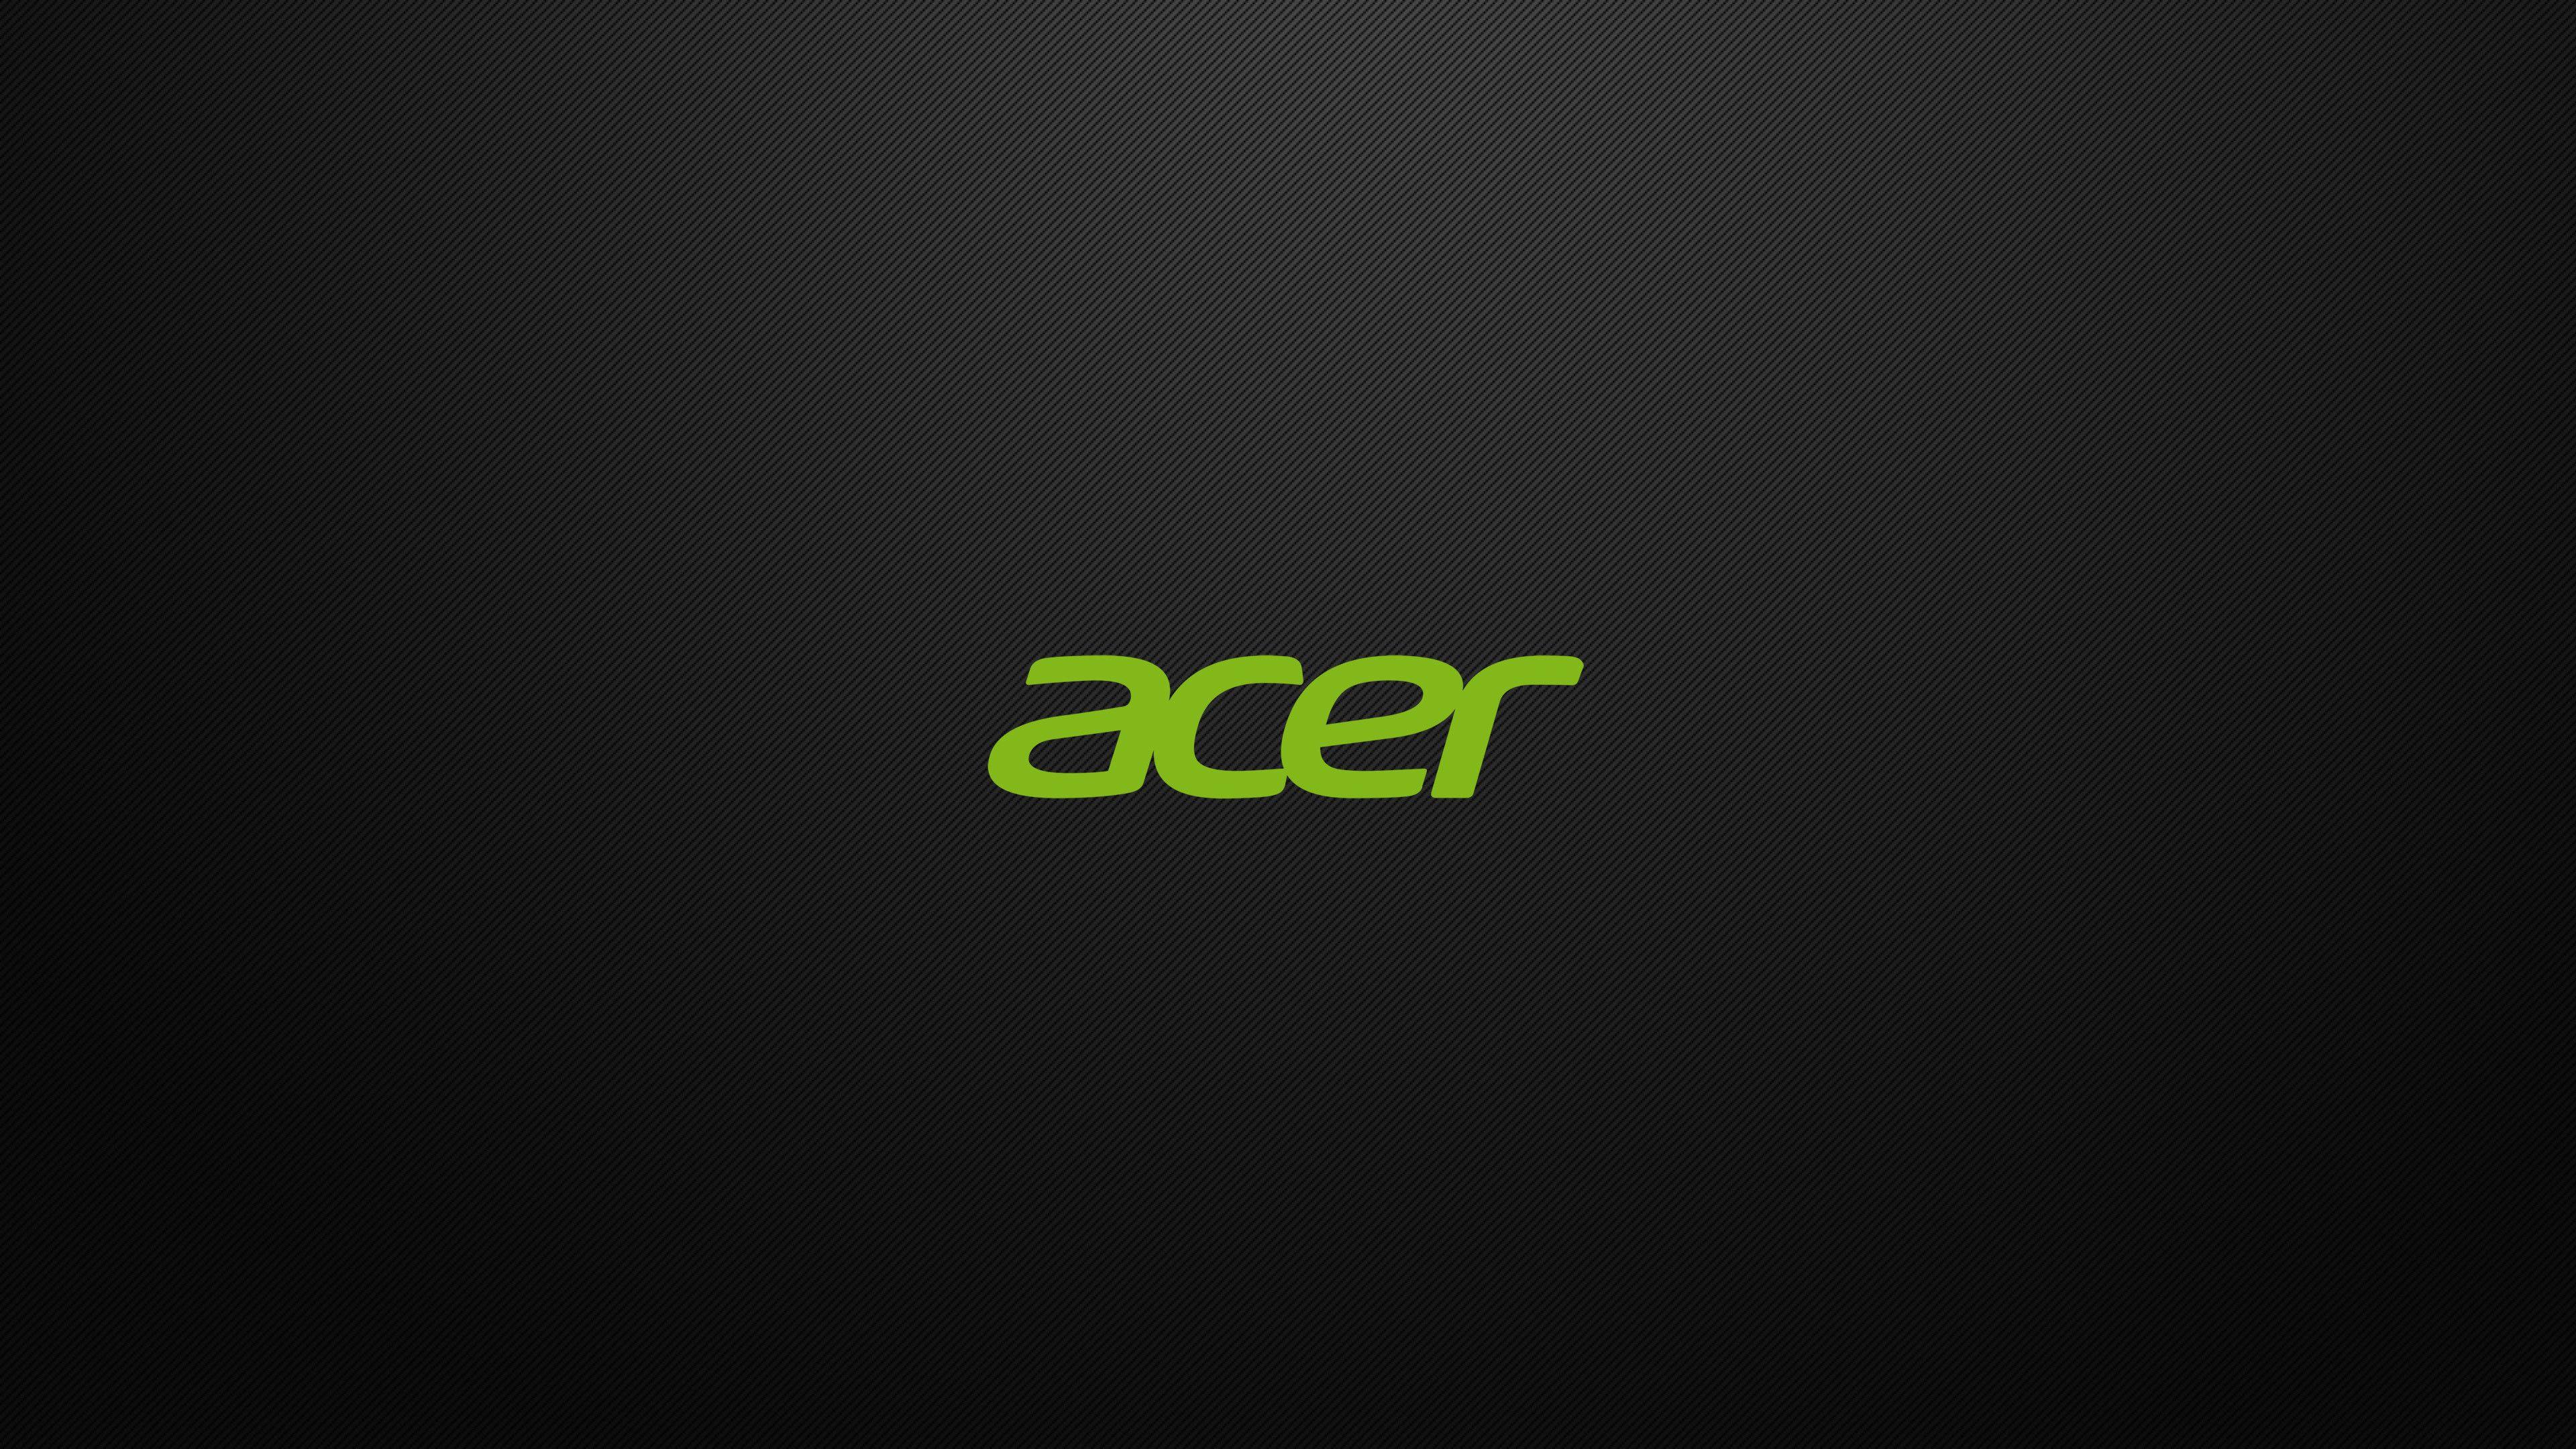 Acer Black Wallpapers Top Free Acer Black Backgrounds Wallpaperaccess